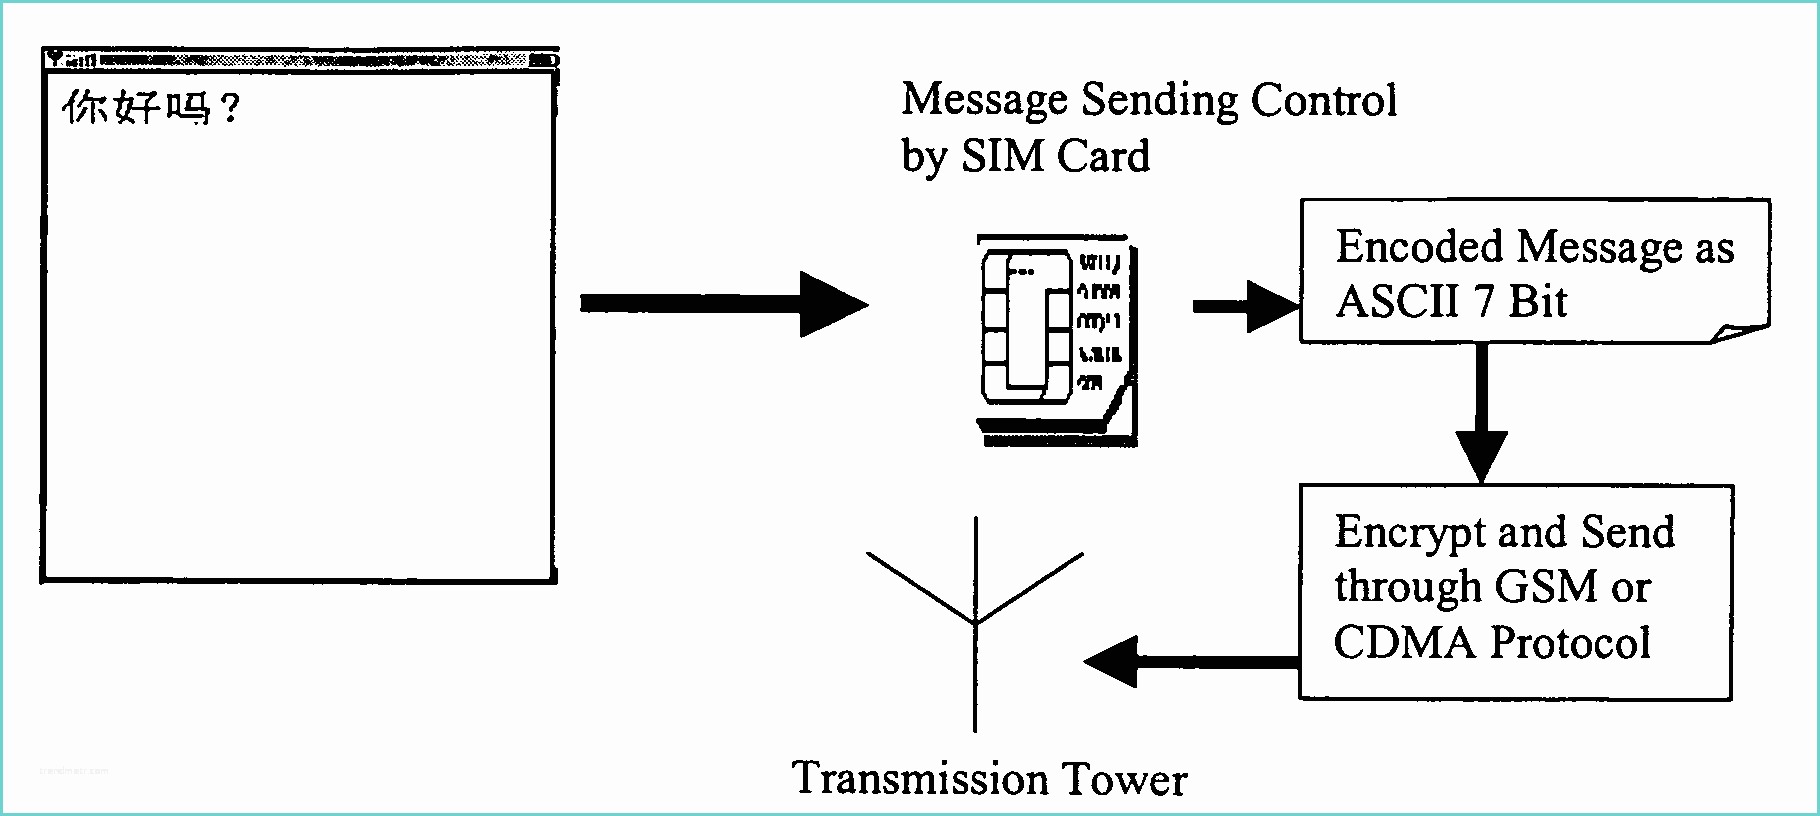 Depot Meaning In Marathi Marathi Meaning Of Sim Card Driverlayer Search Engine